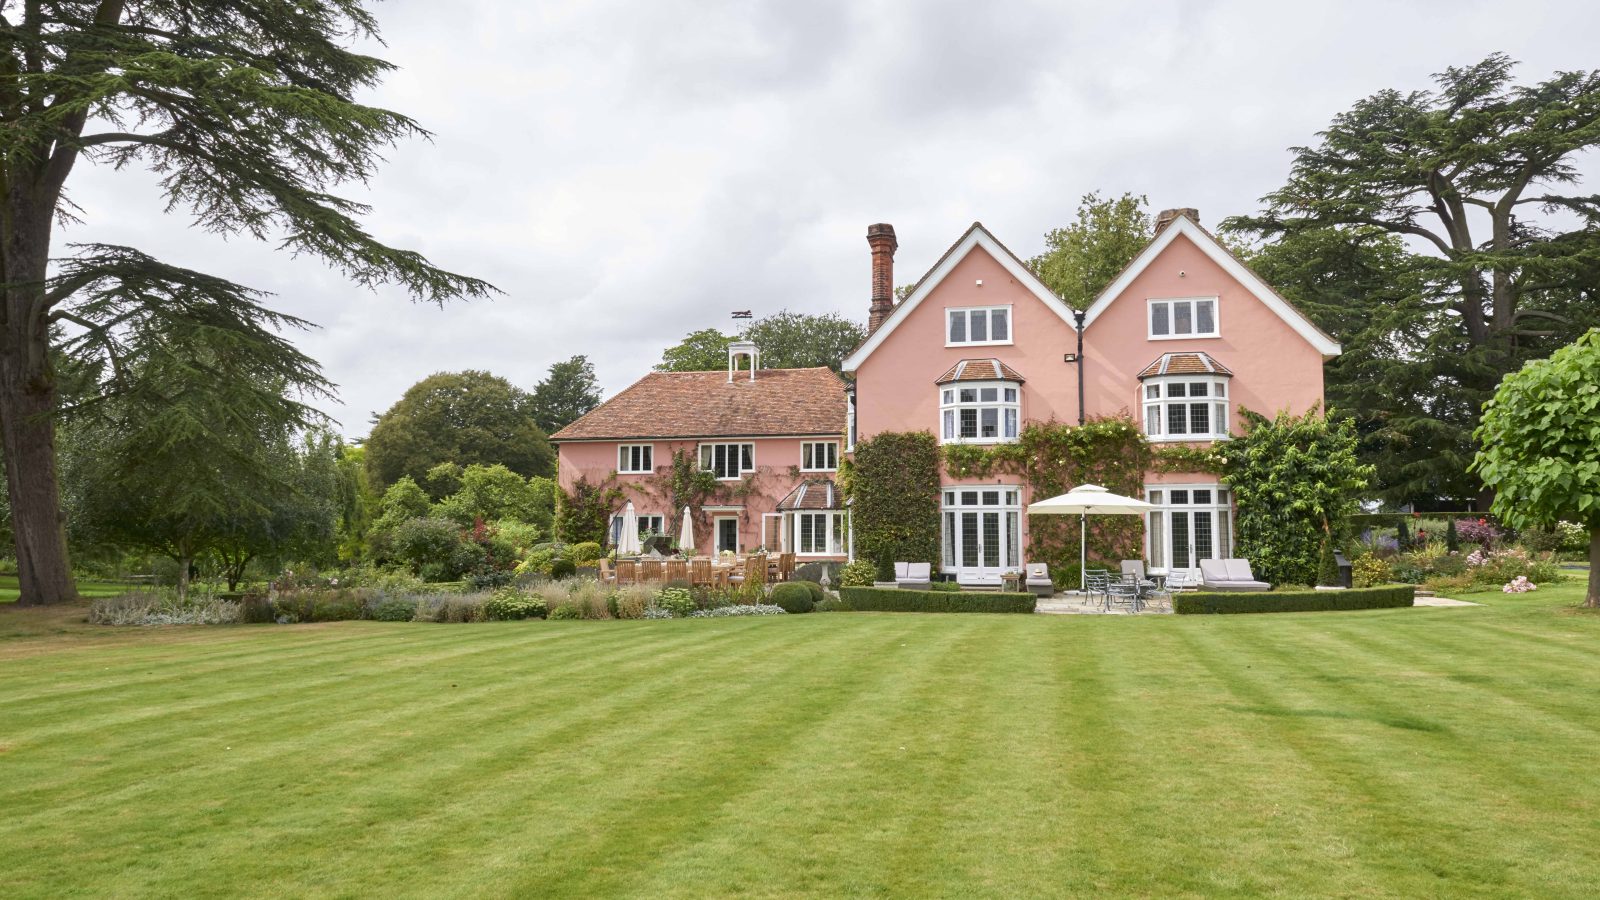  Suffolk Mansion - kate & tom's Large Holiday Homes